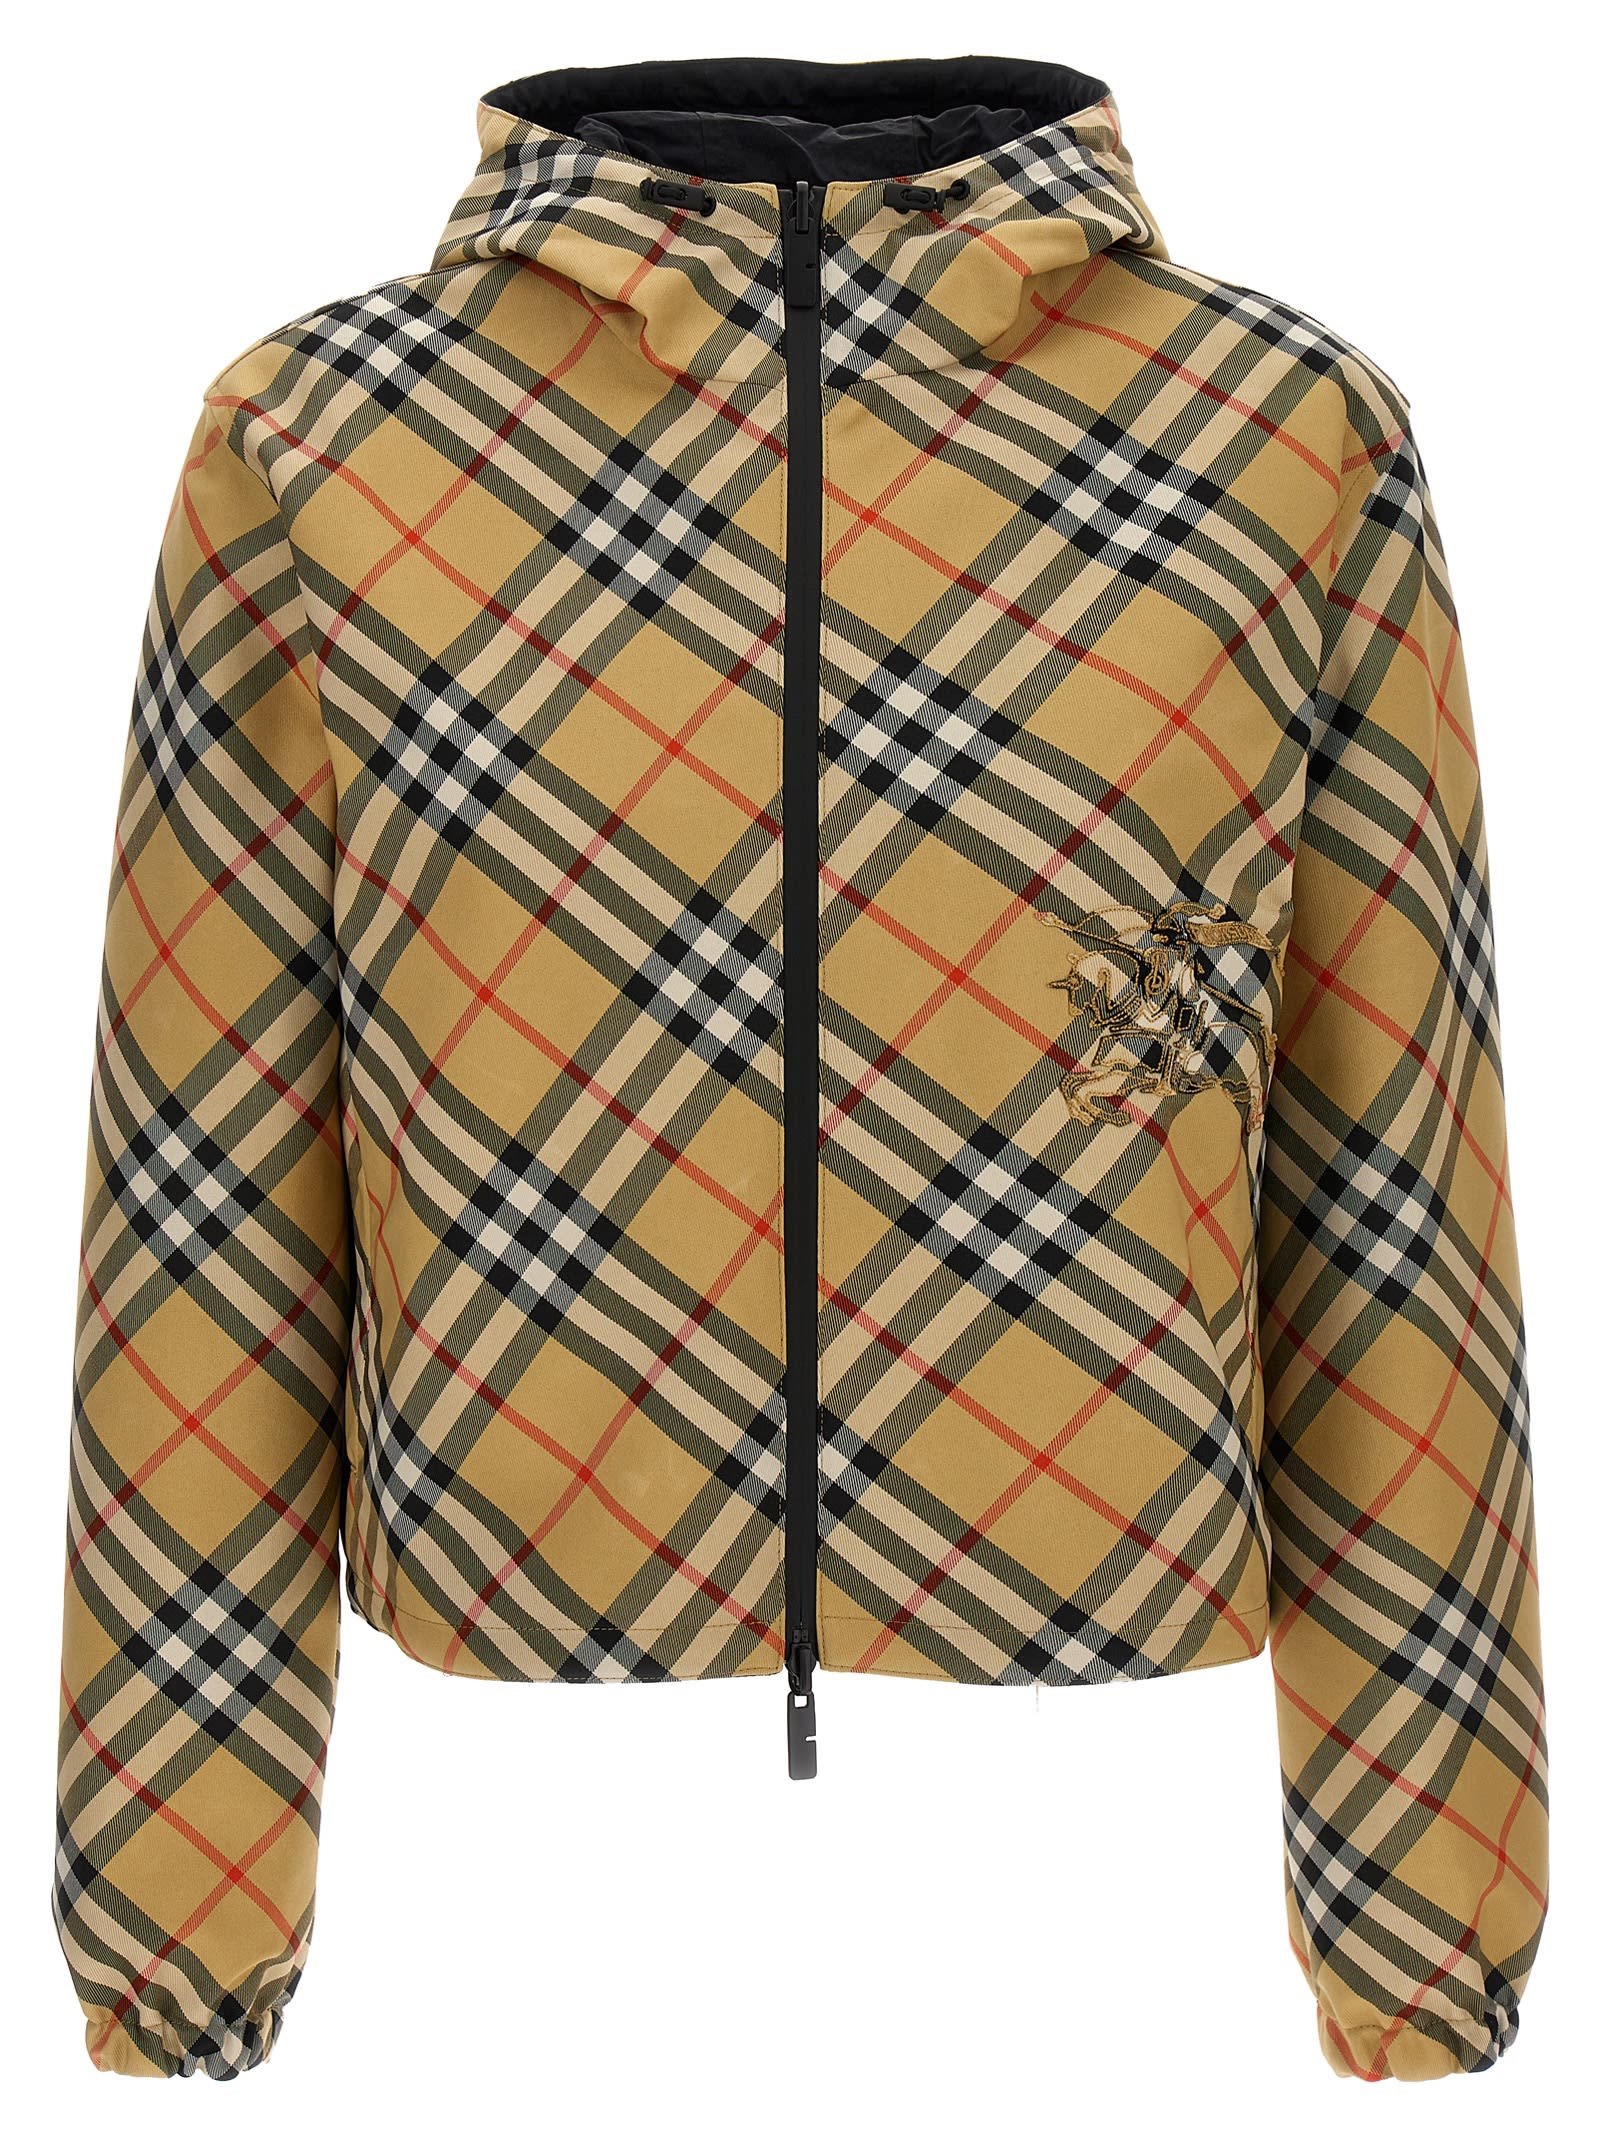 Burberry Cropped Check Reversible Jacket